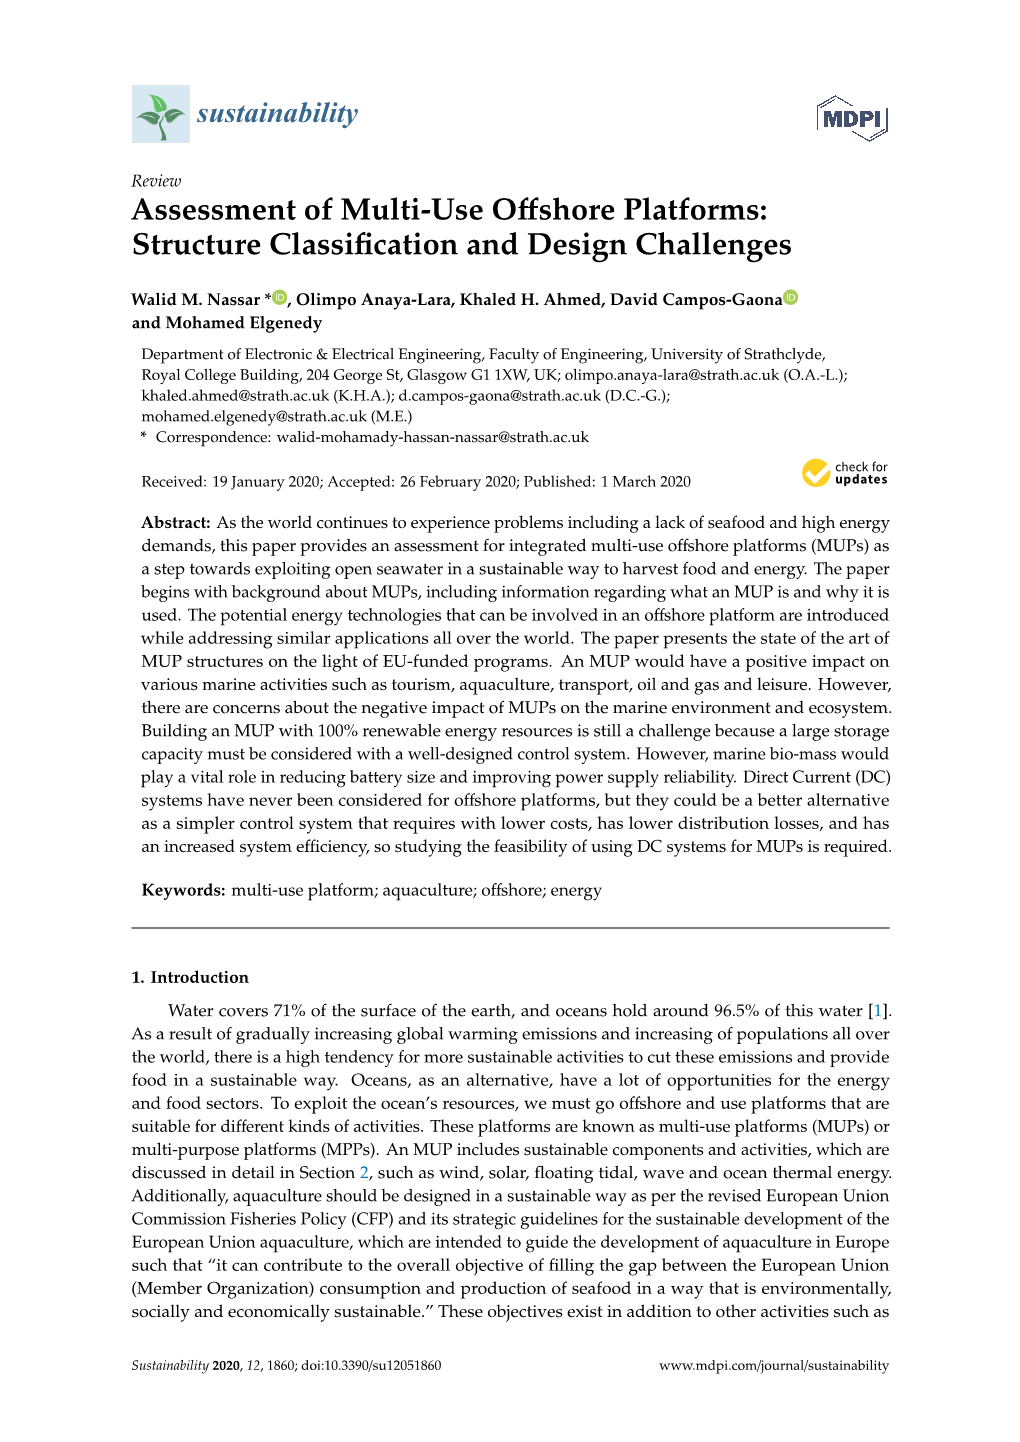 Assessment of Multi-Use Offshore Platforms: Structure Classification